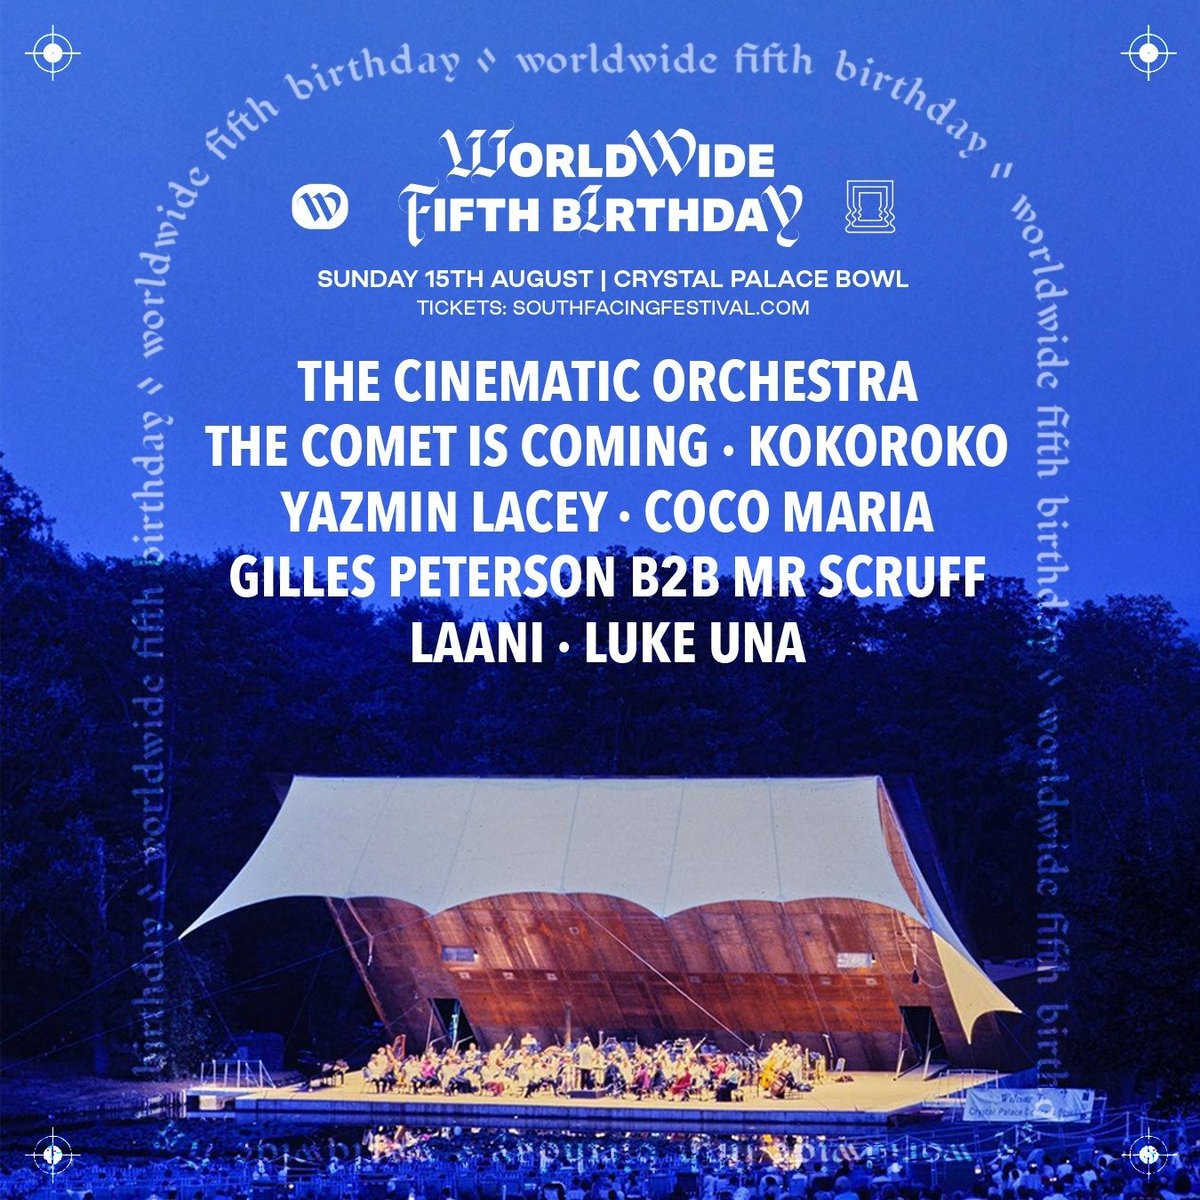 Unfortunately, Kruder & Dorfmeister are unable to travel and perform at our 5th Birthday at the Crystal Palace Bowl due to pandemic developments. However, we are absolutely delighted that @TCO_Official will be joining us to perform a very special live show as the sun goes down.